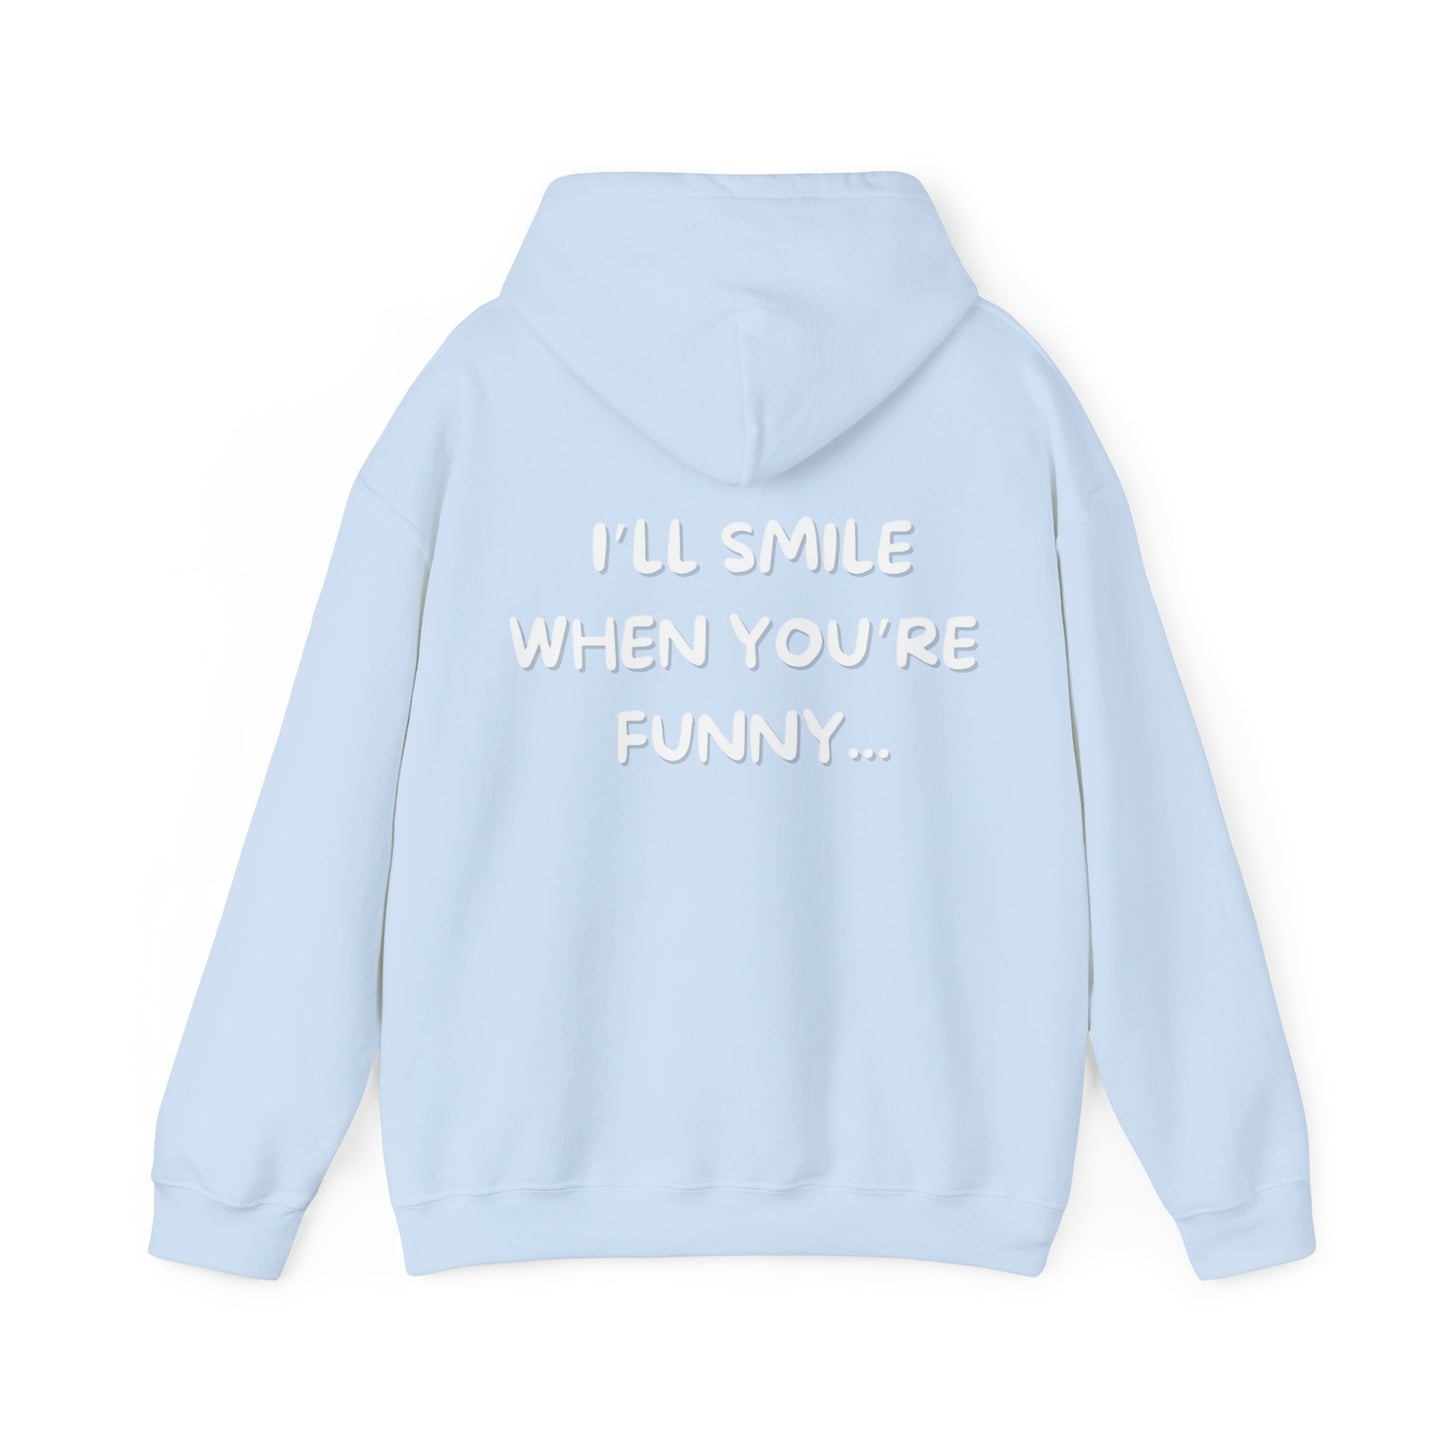 When You're Funny V1 - Hoodie